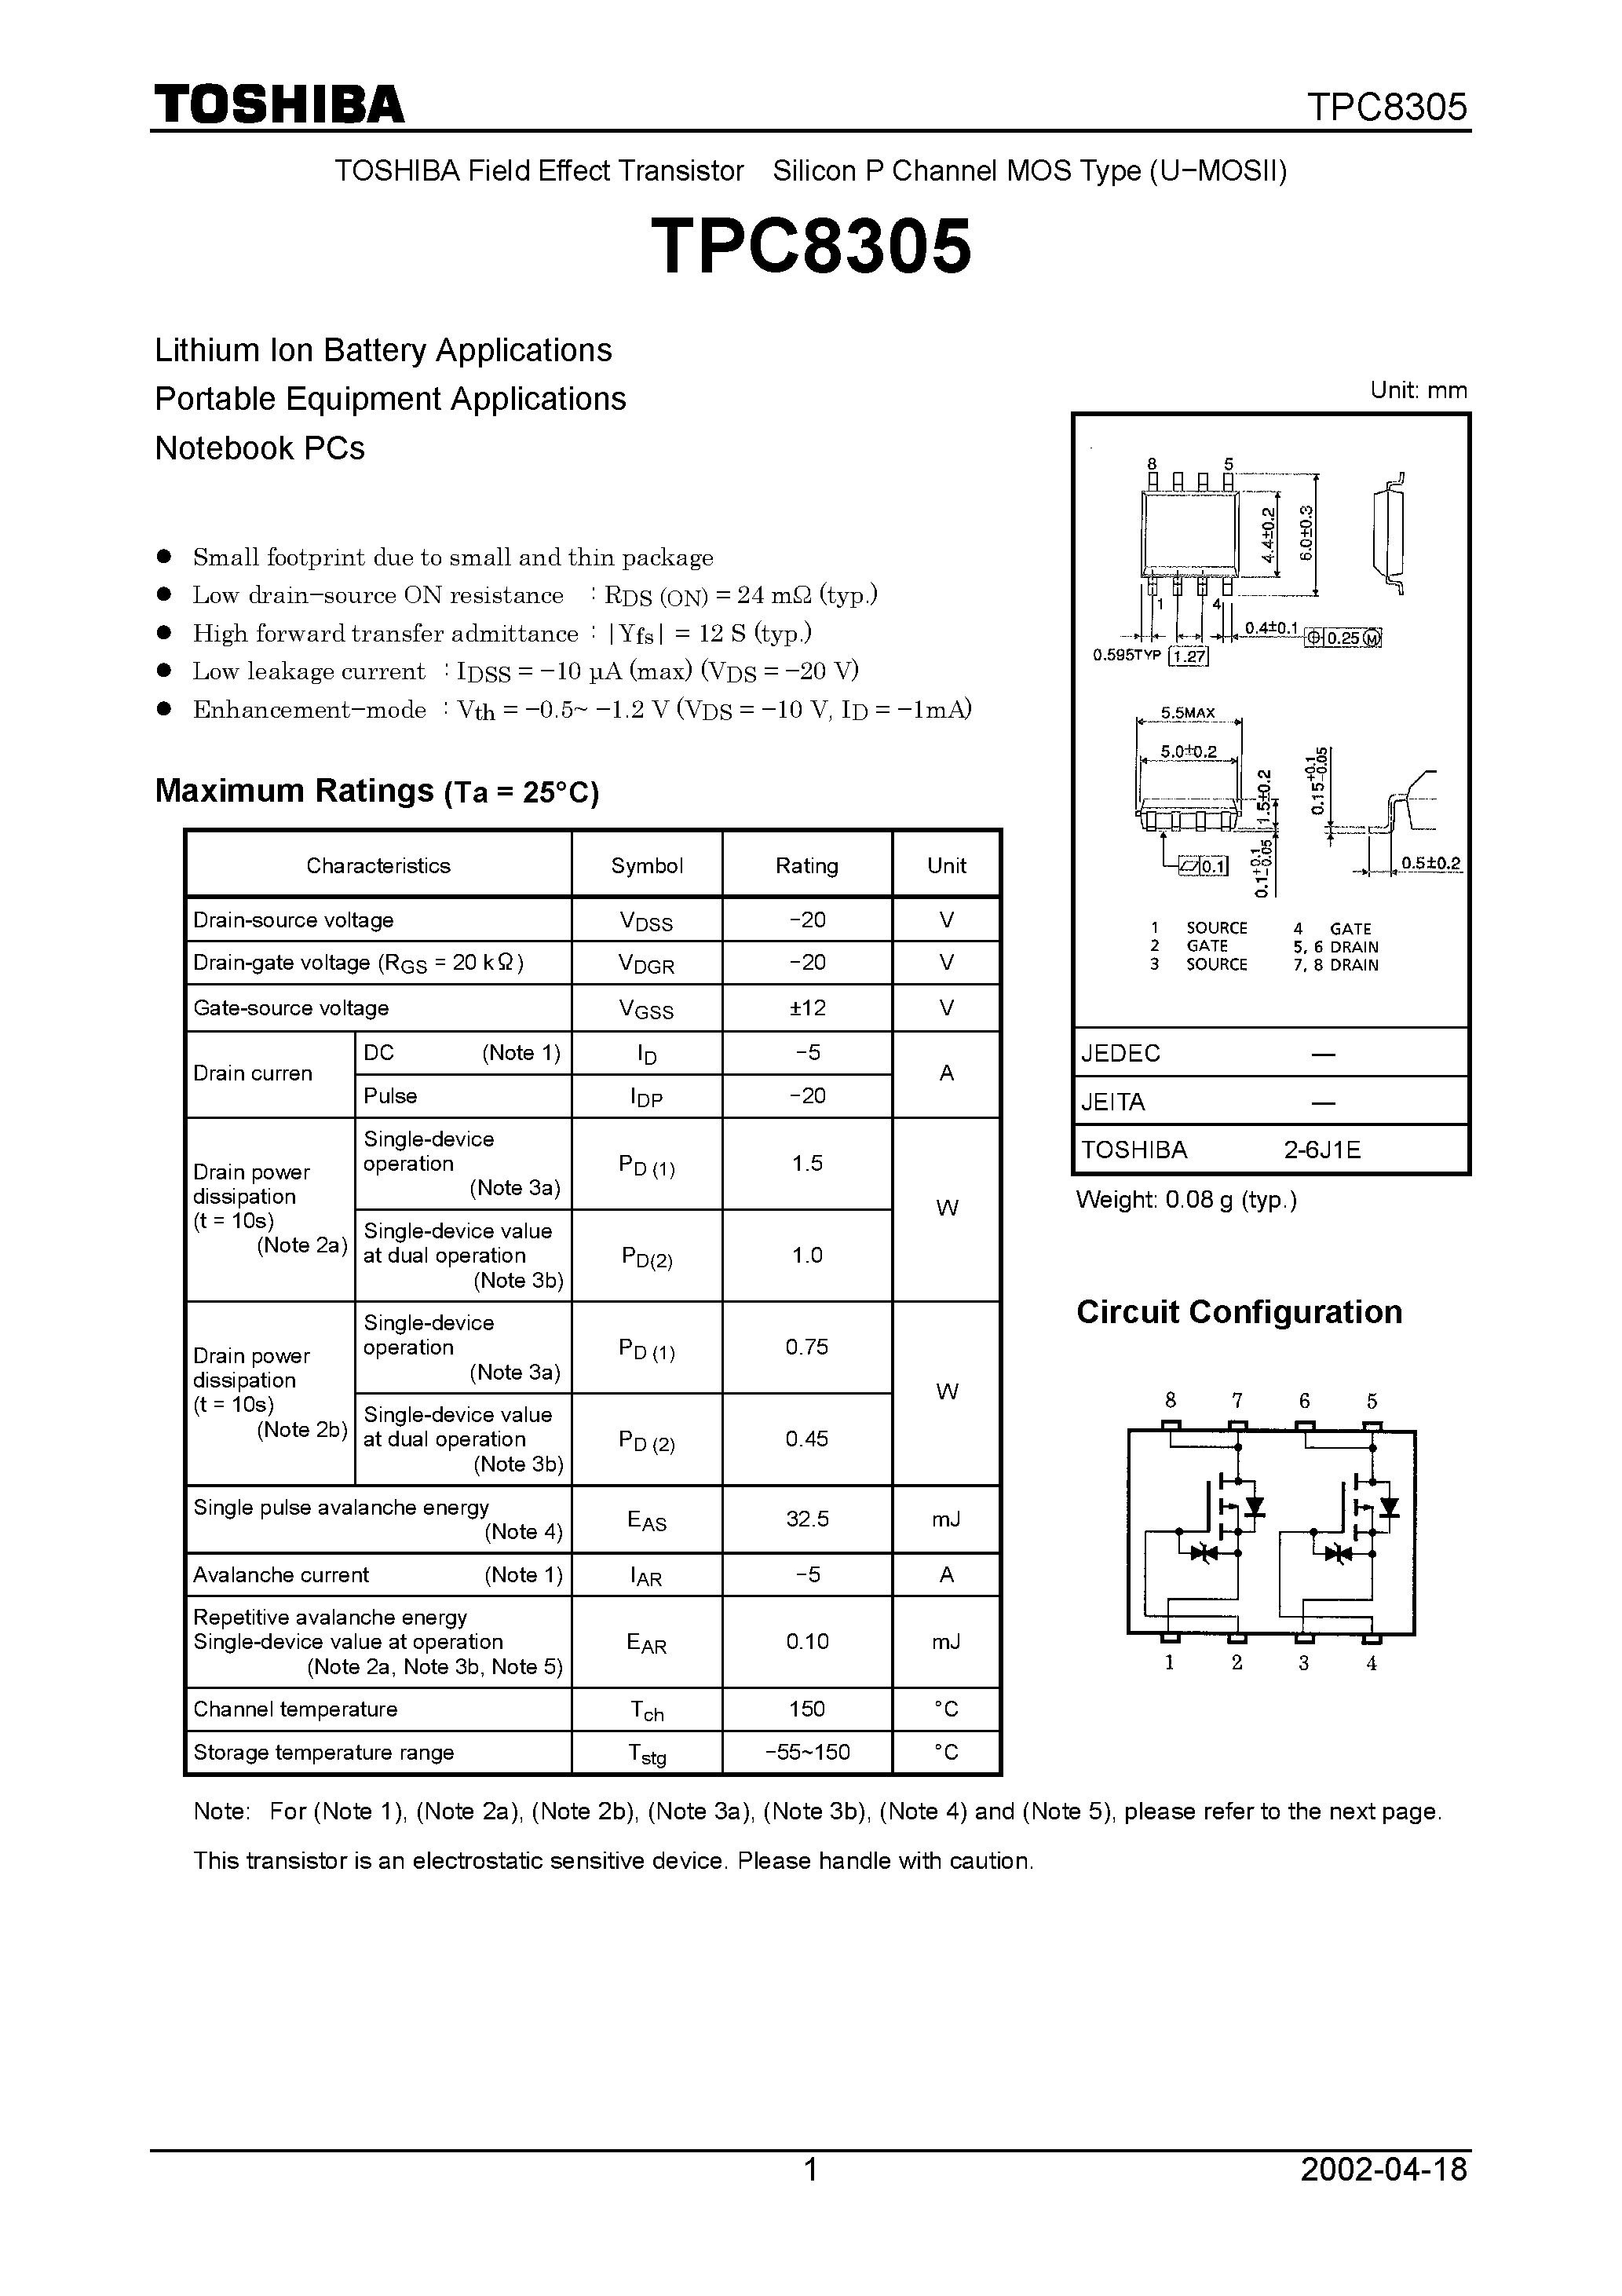 Datasheet TPC8305 - Silicon P Channel MOS Type (U&#8722;MOSII) page 1